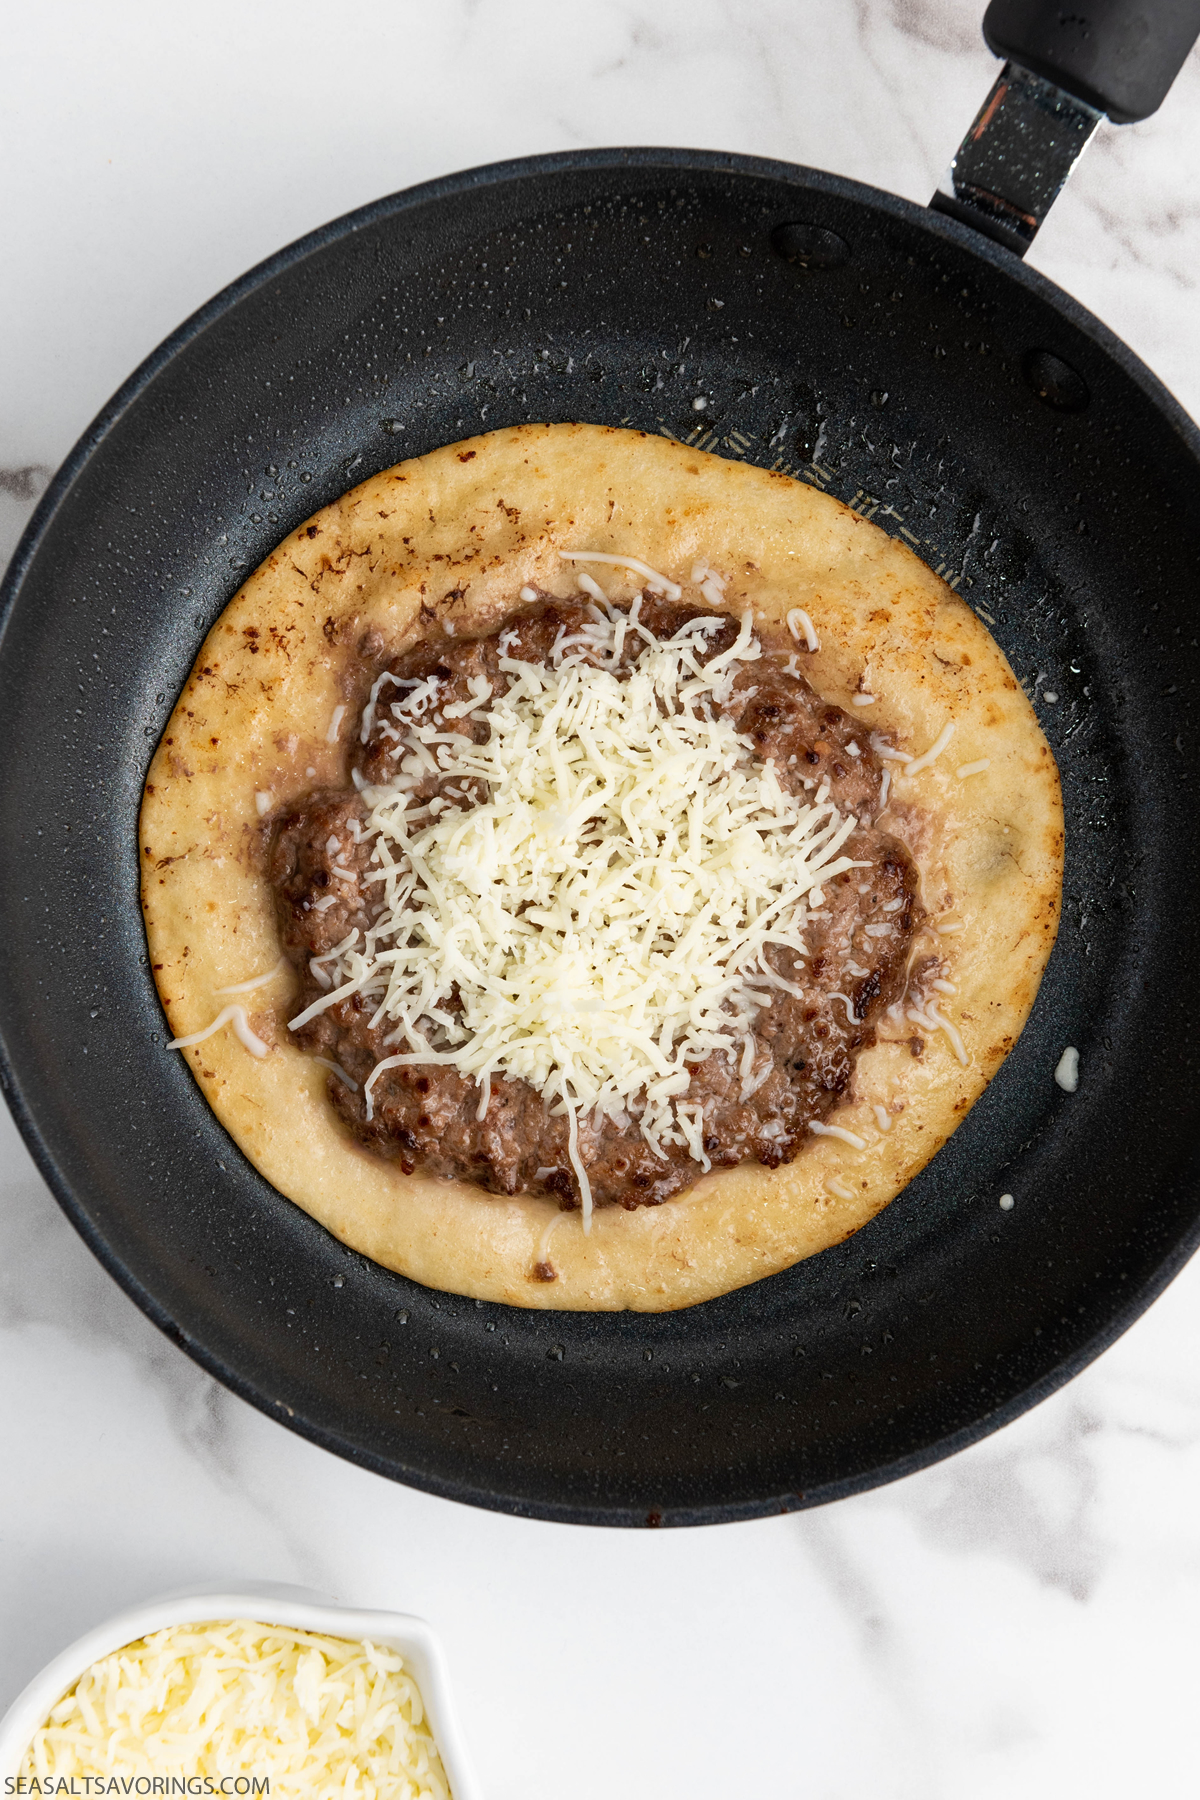 tortilla in a pan cooking with beef patty and cheese on top